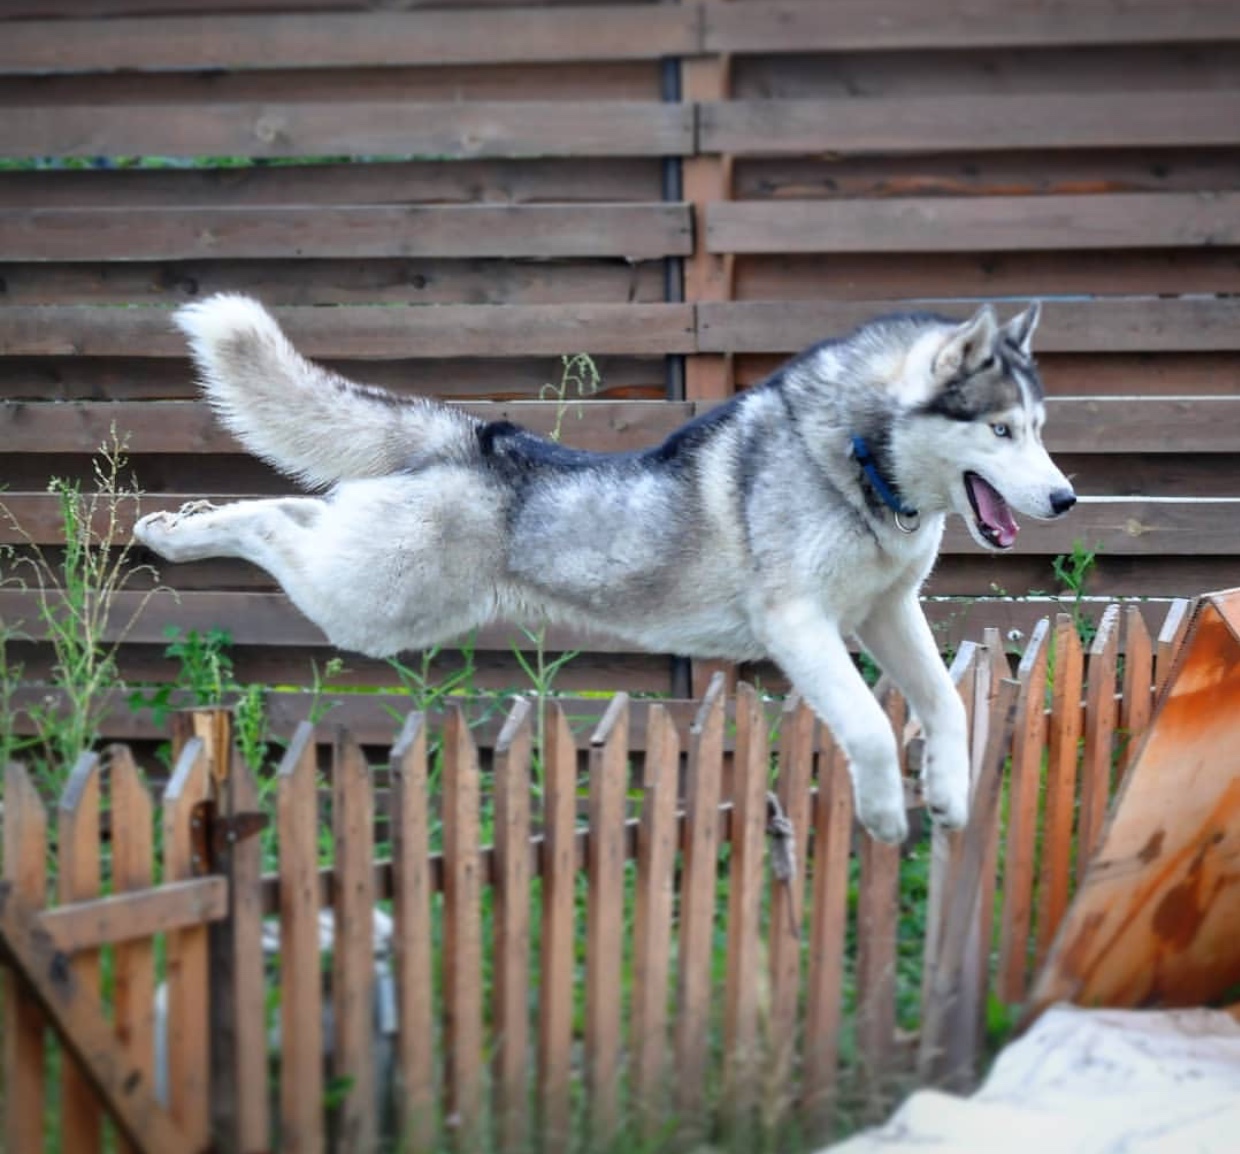 A Husky jumping over the fence